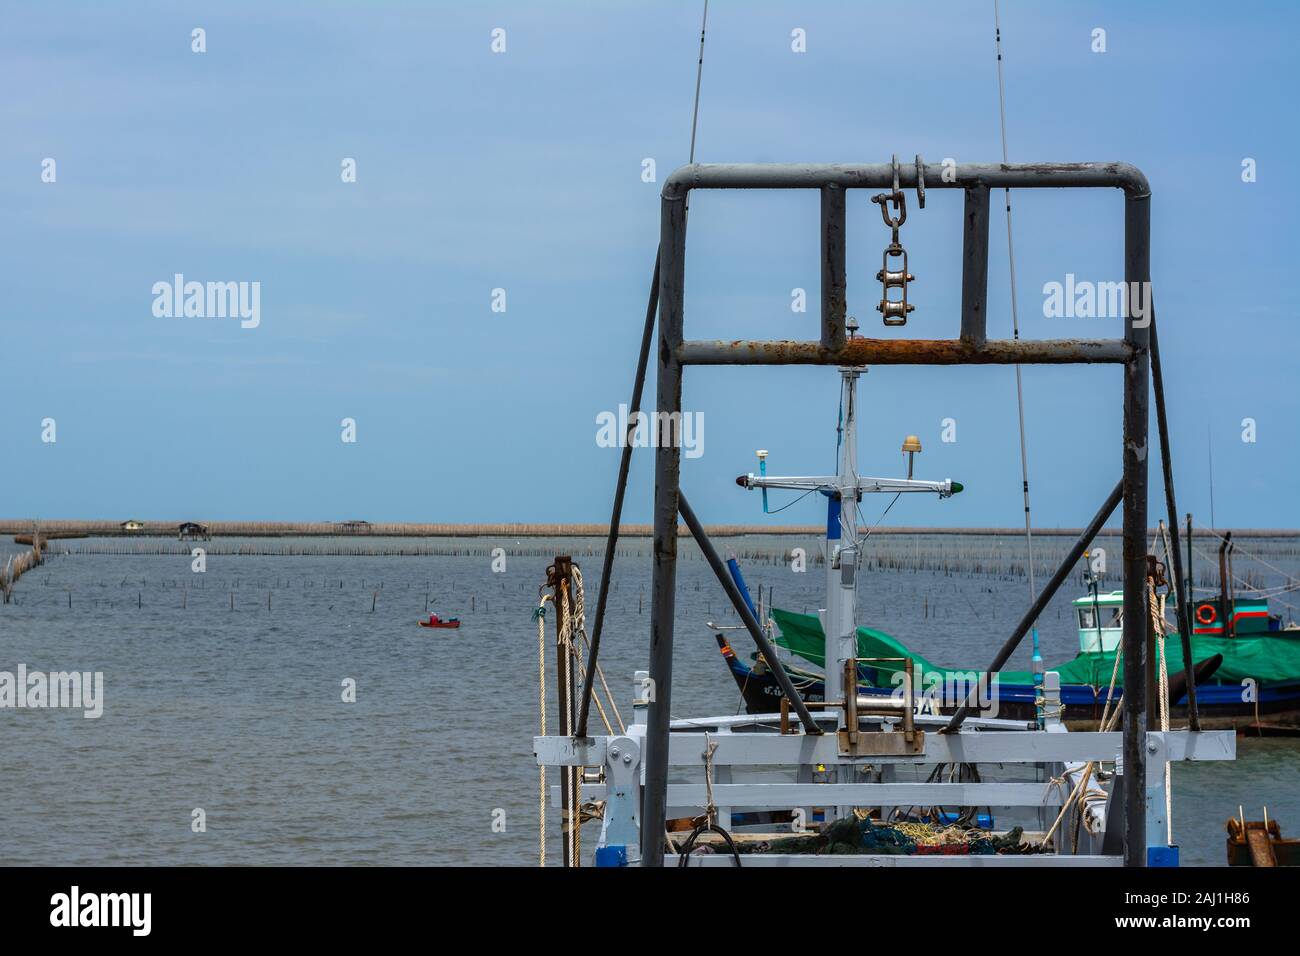 Fishing boat anchored in the harbor. Stock Photo